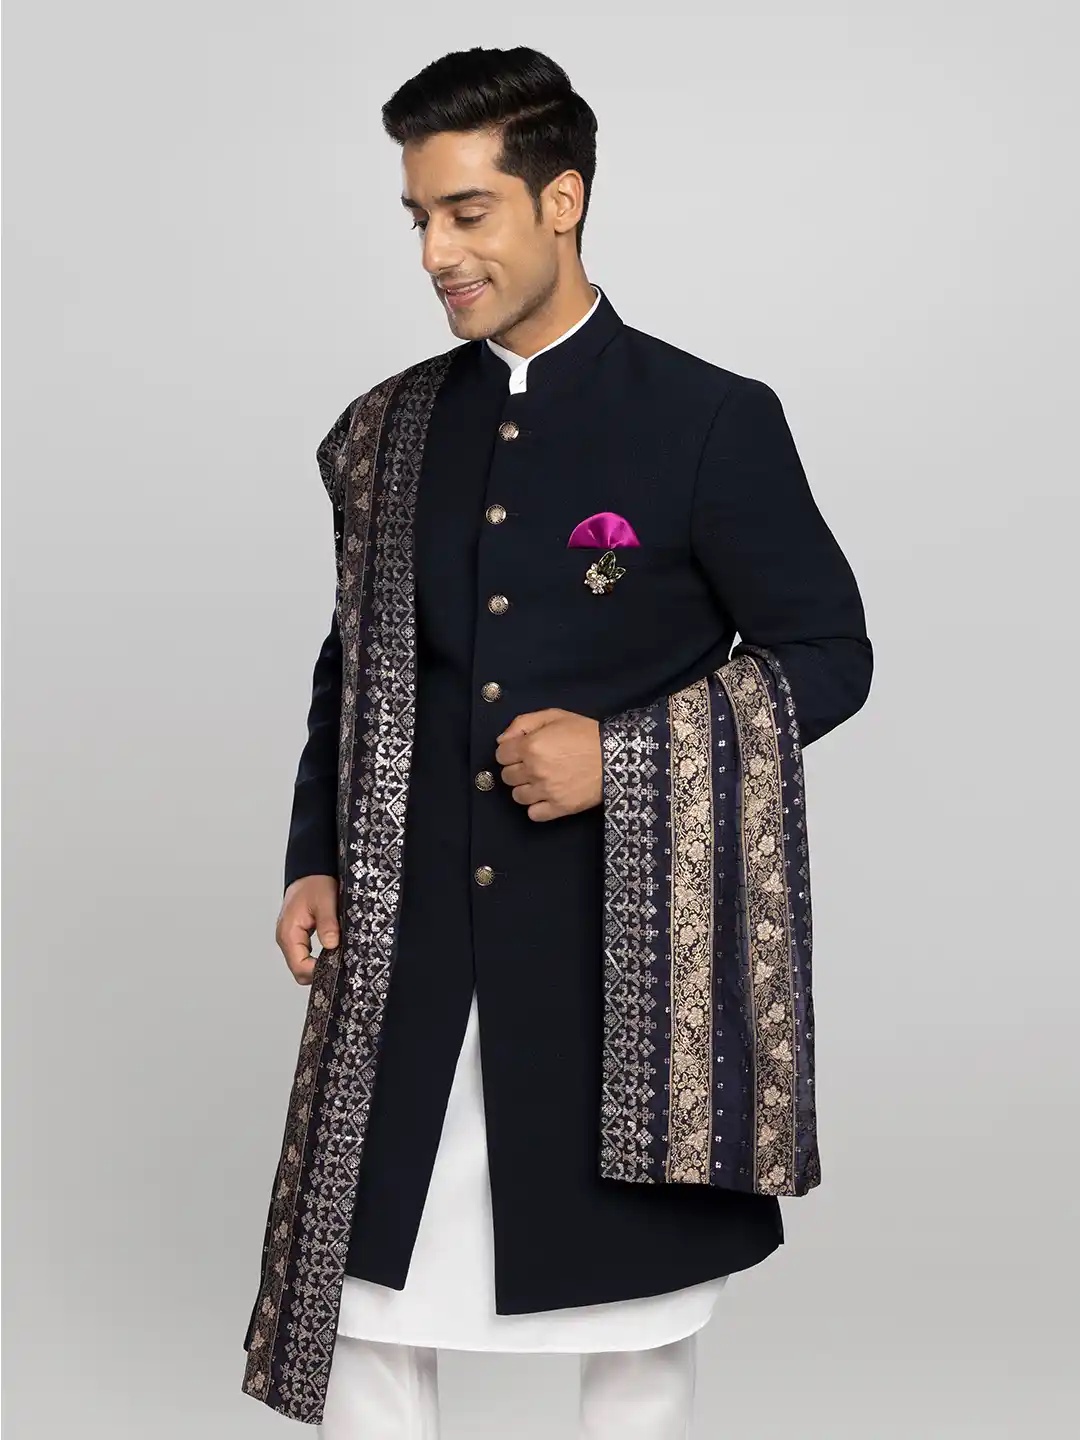 Roots and Raiment: Adorn Yourself in the Richness of Ethnic Wear